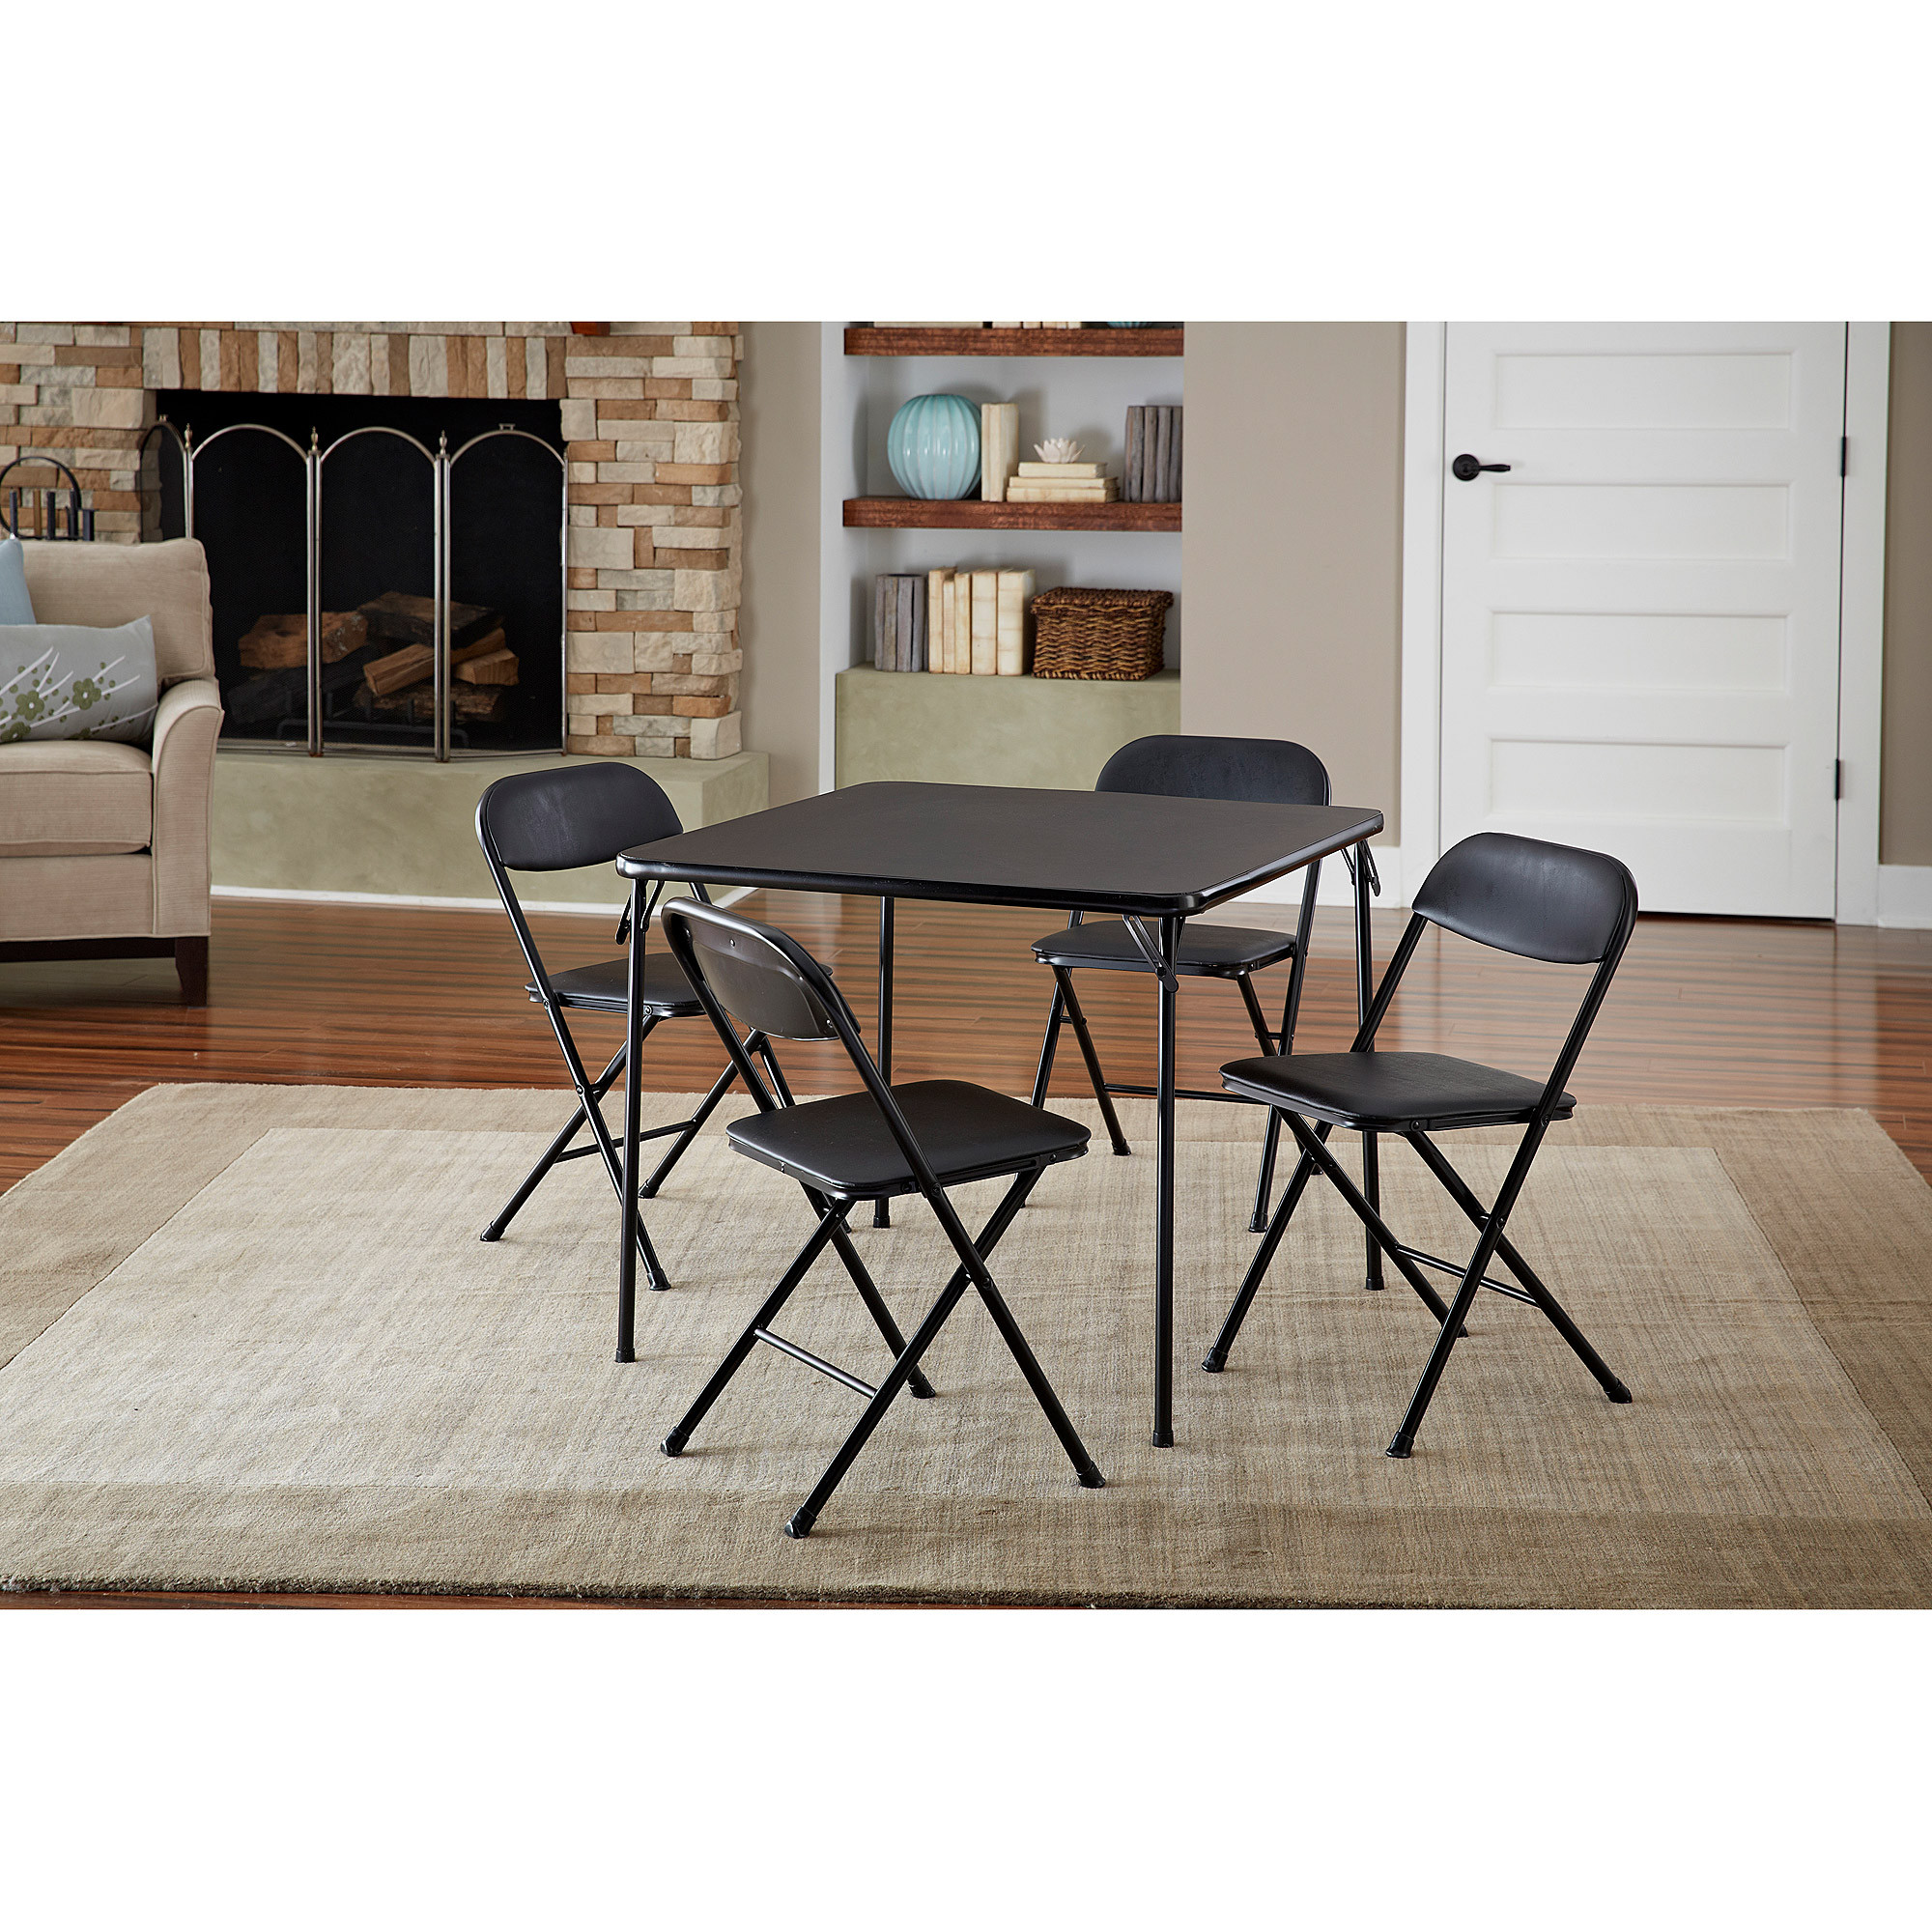 Best ideas about Walmart Patio Table
. Save or Pin Outdoor Plastic Tables Walmart Now.